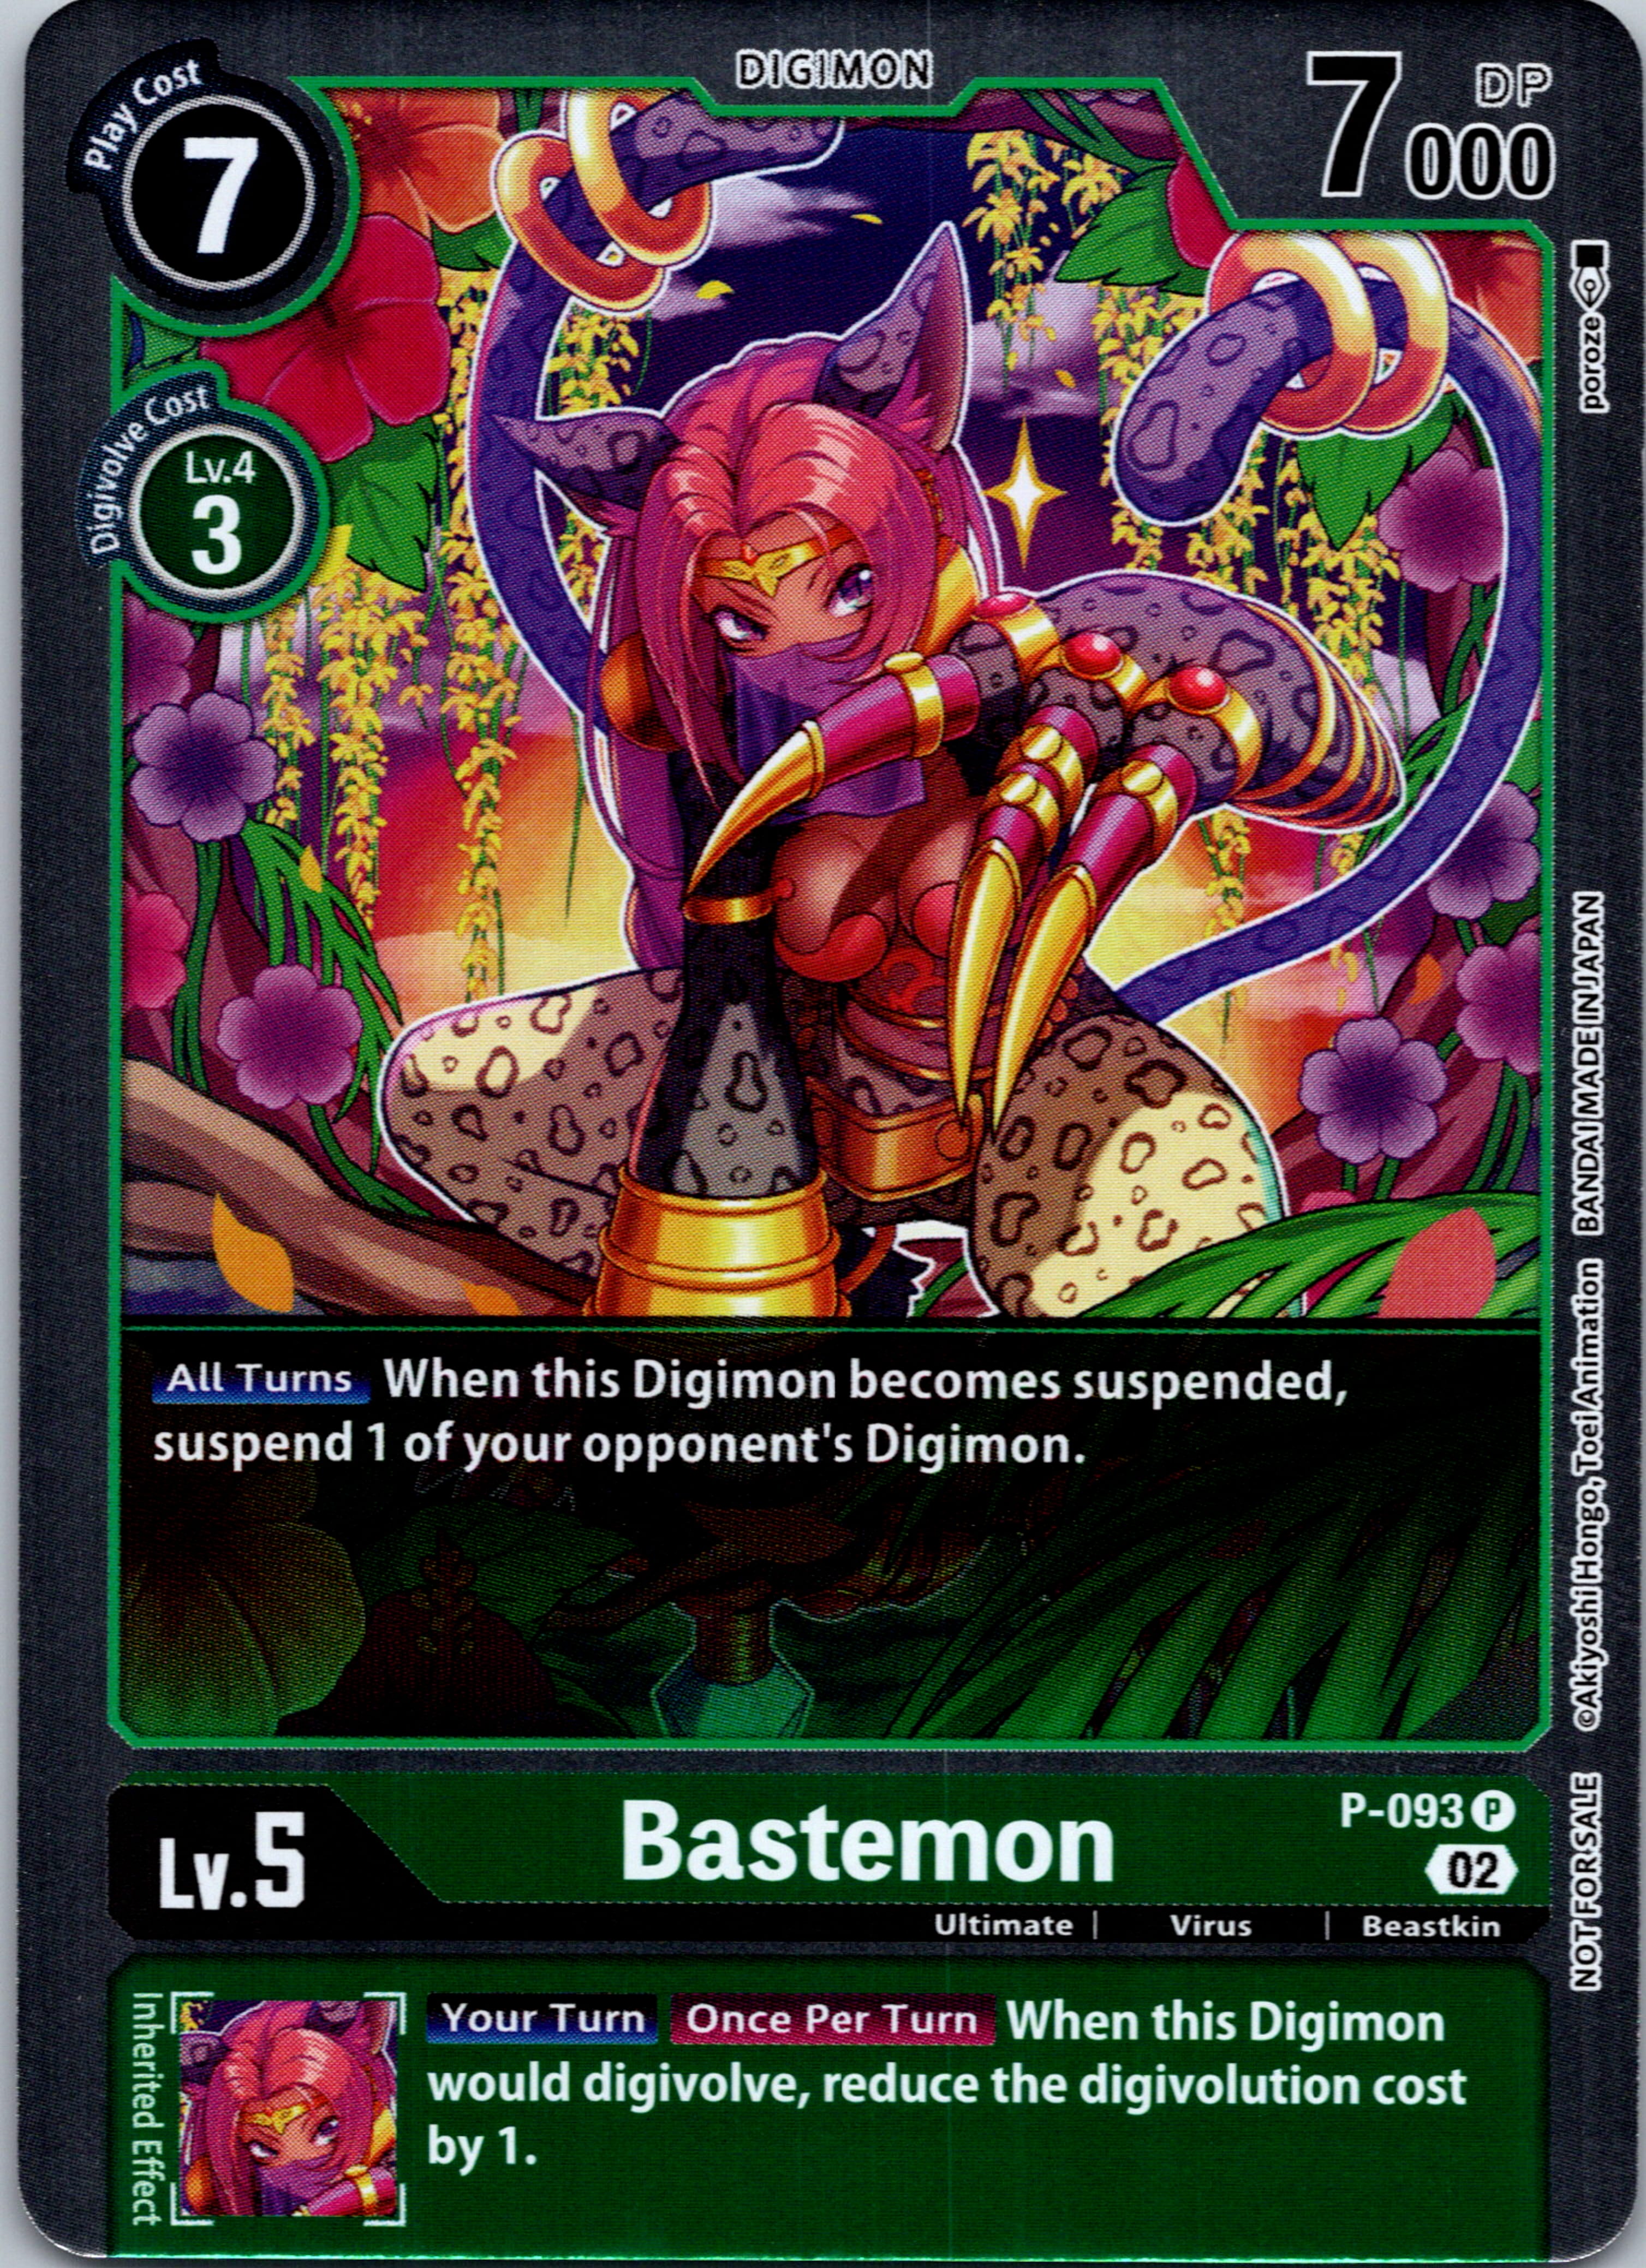 Bastemon - P-093 (3rd Anniversary Update Pack) [P-093] [Digimon Promotion Cards] Foil